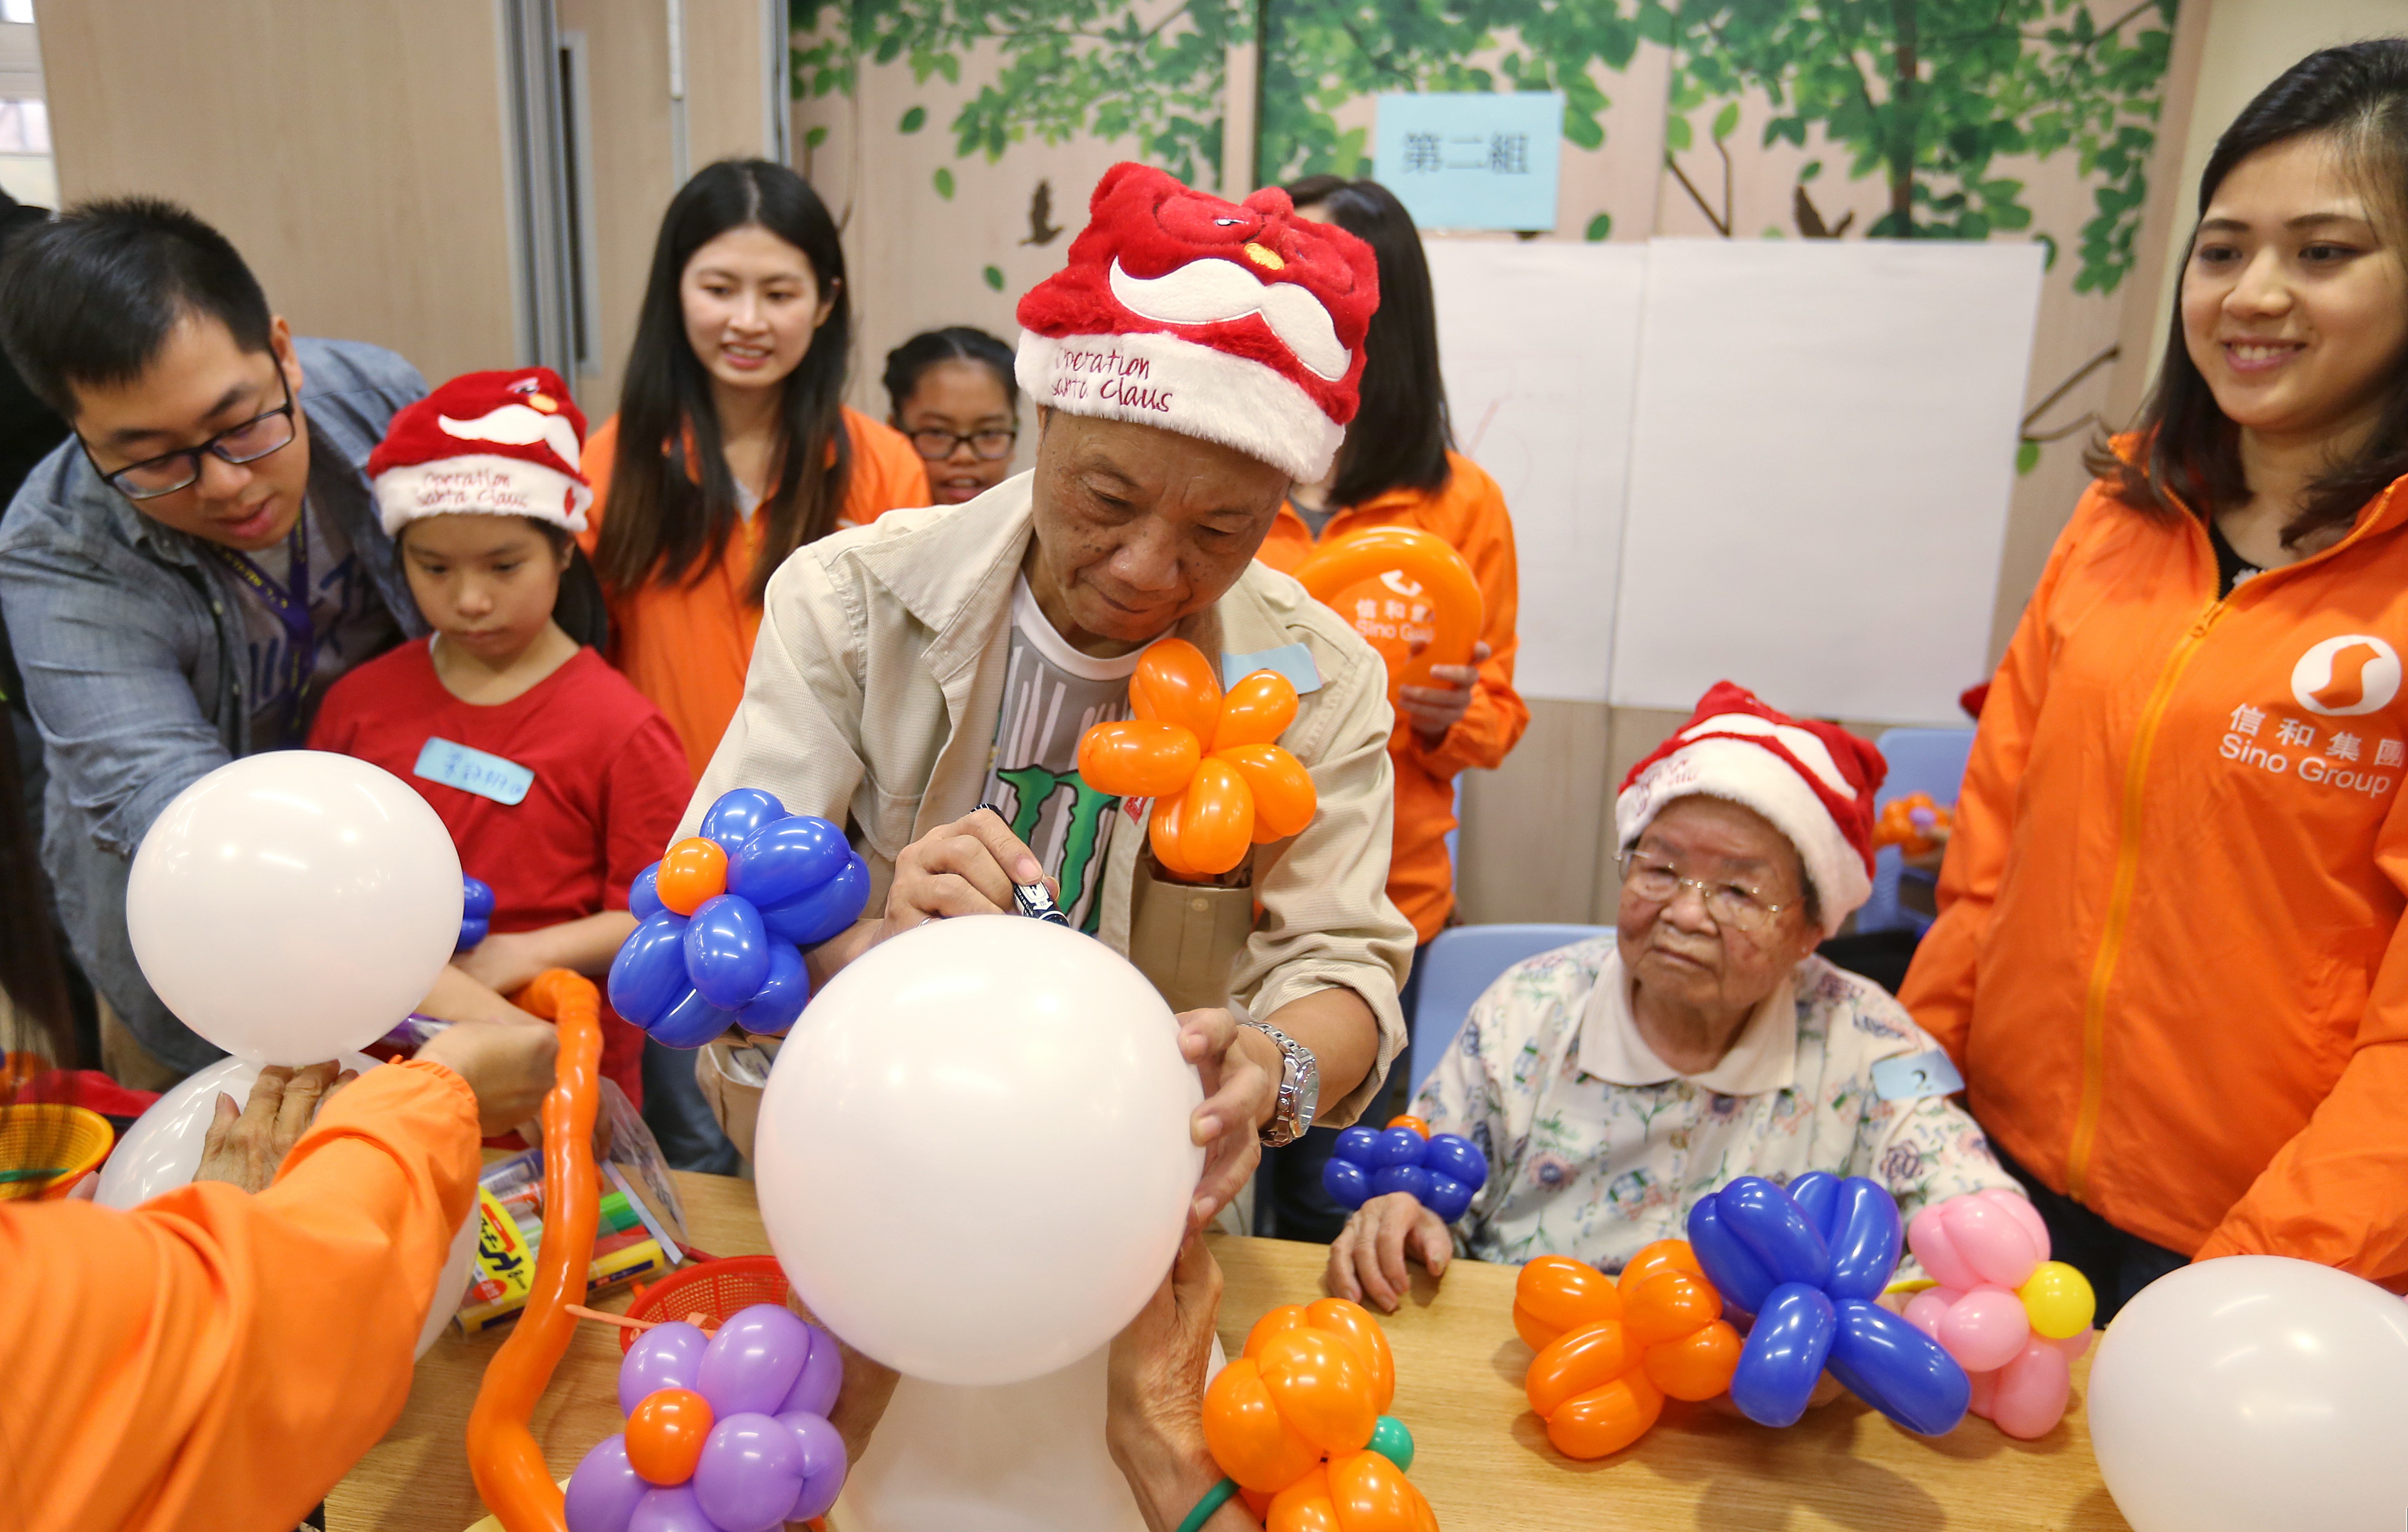 Balloon twisting featured prominently in the charity event. Photo: Xiaomei Chen